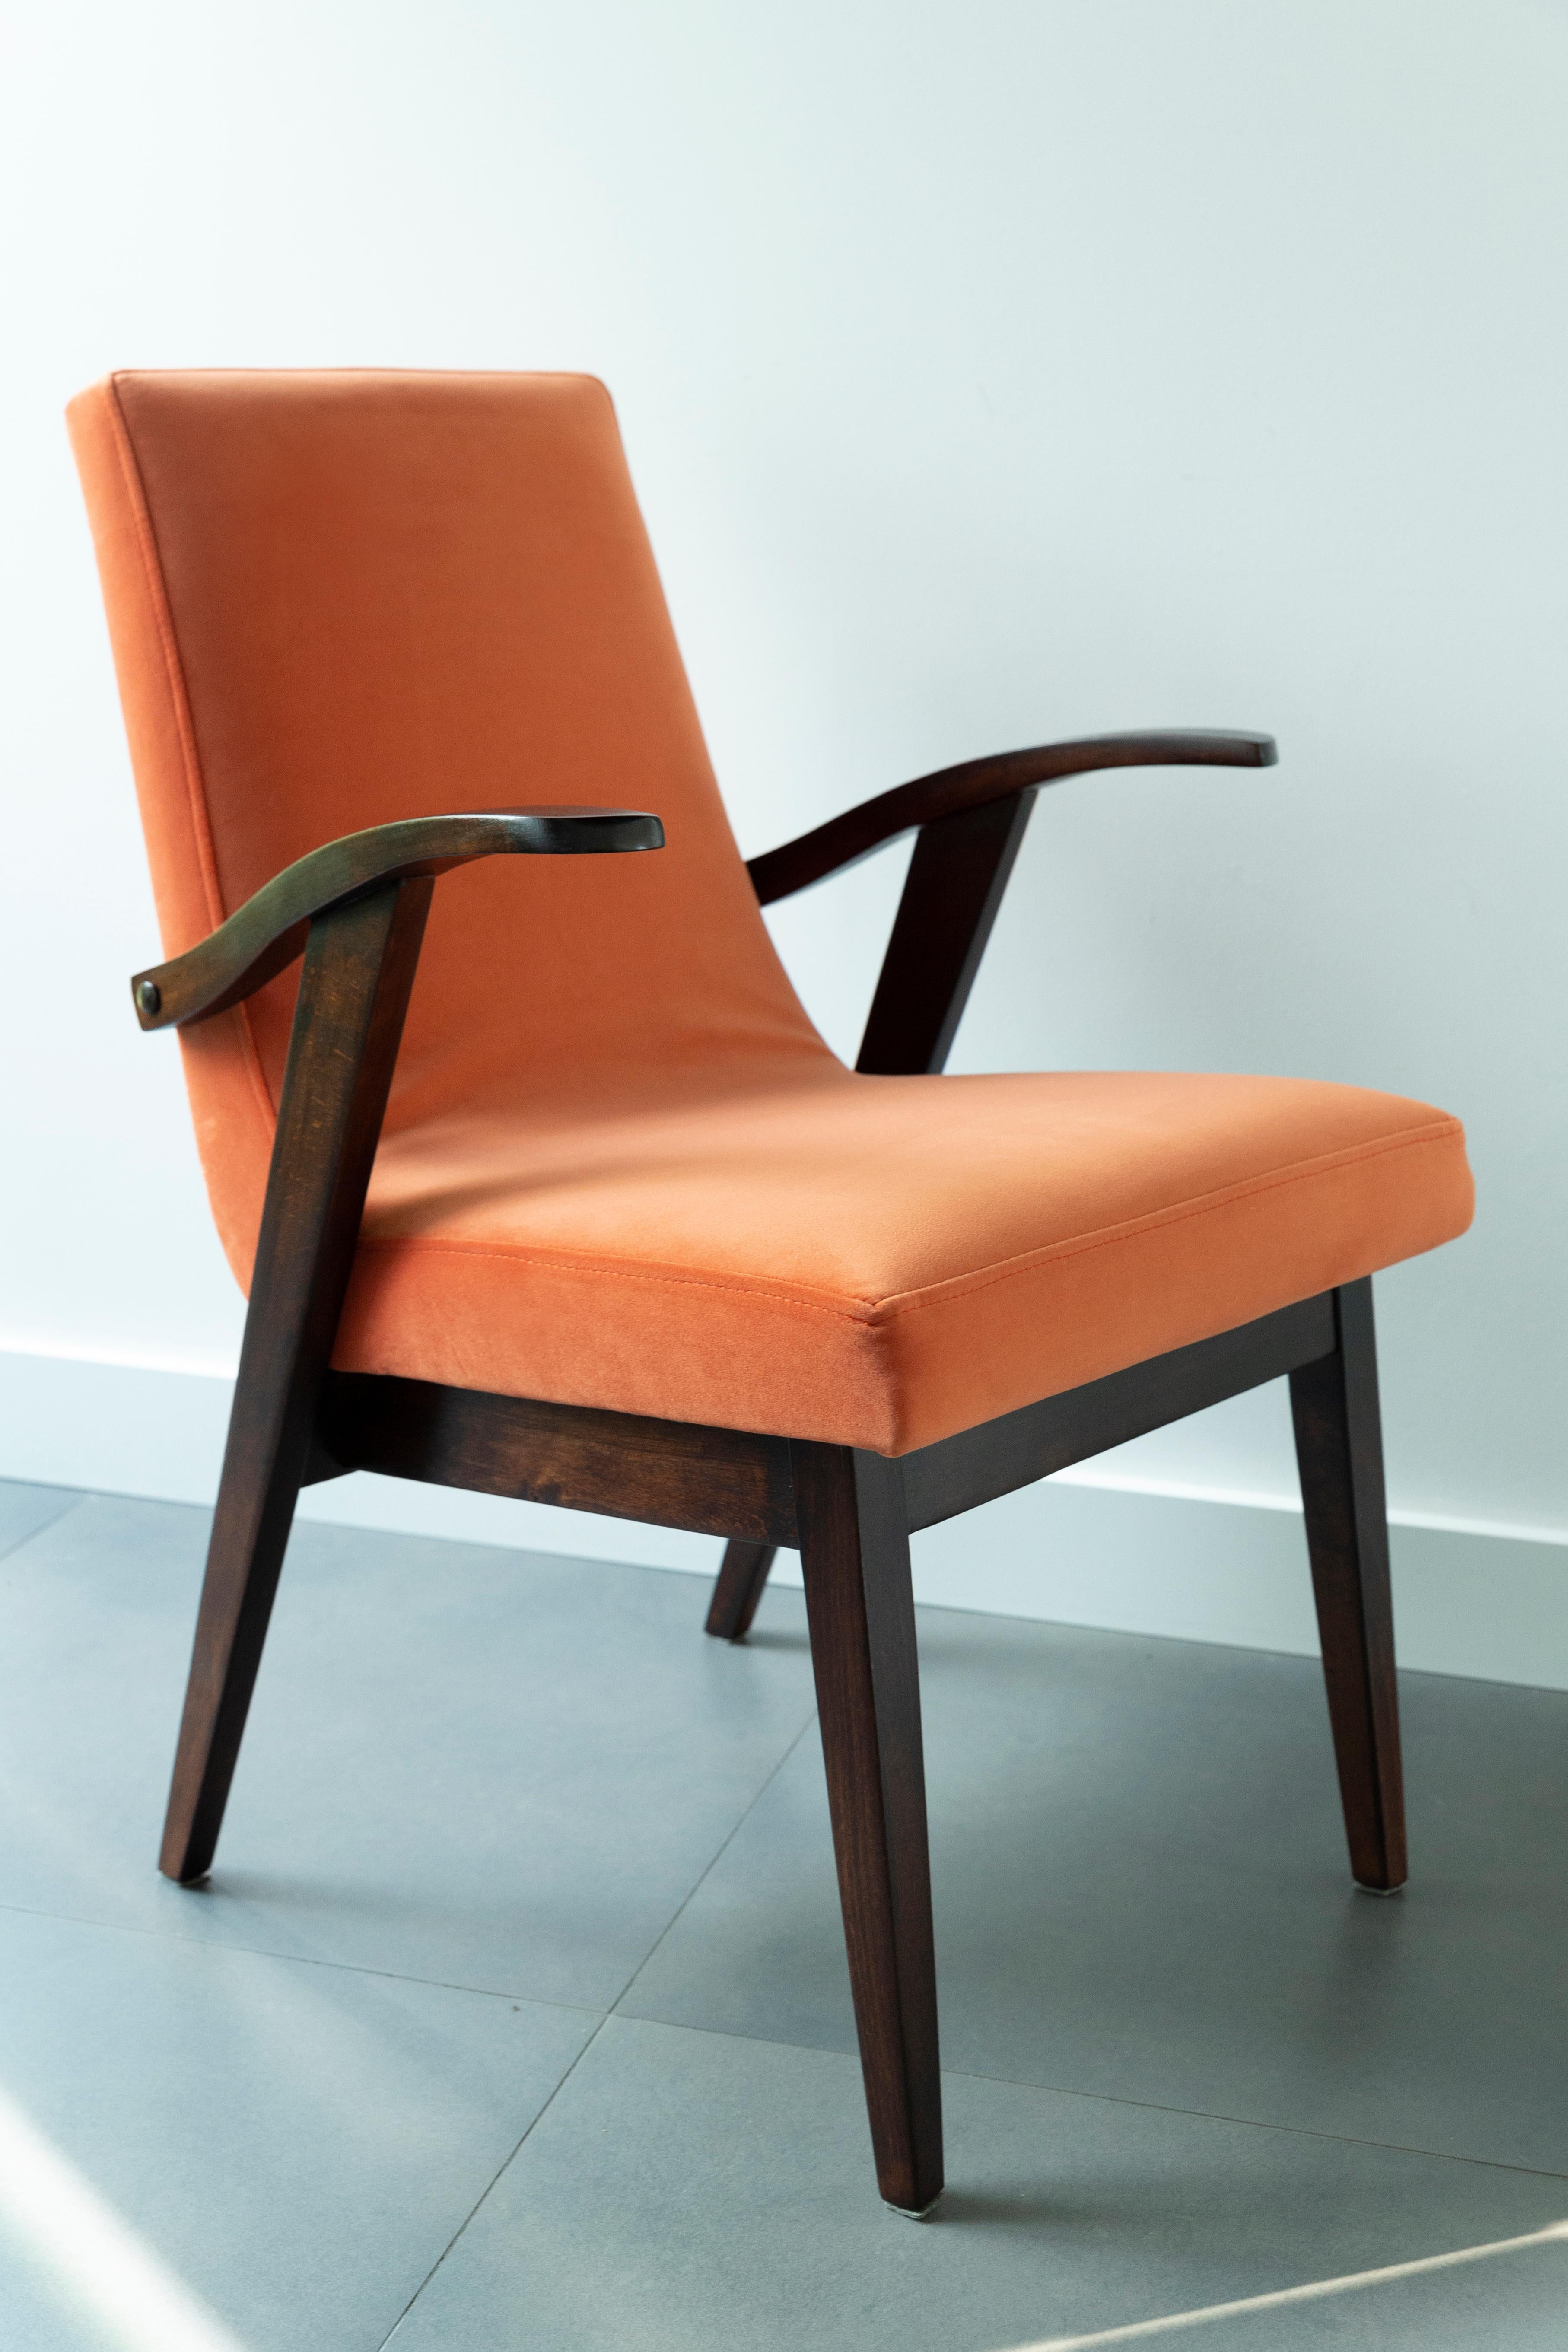 Polish Set of Four Vintage Chairs in Orange Velvet by Mieczyslaw Puchala, 1960s For Sale